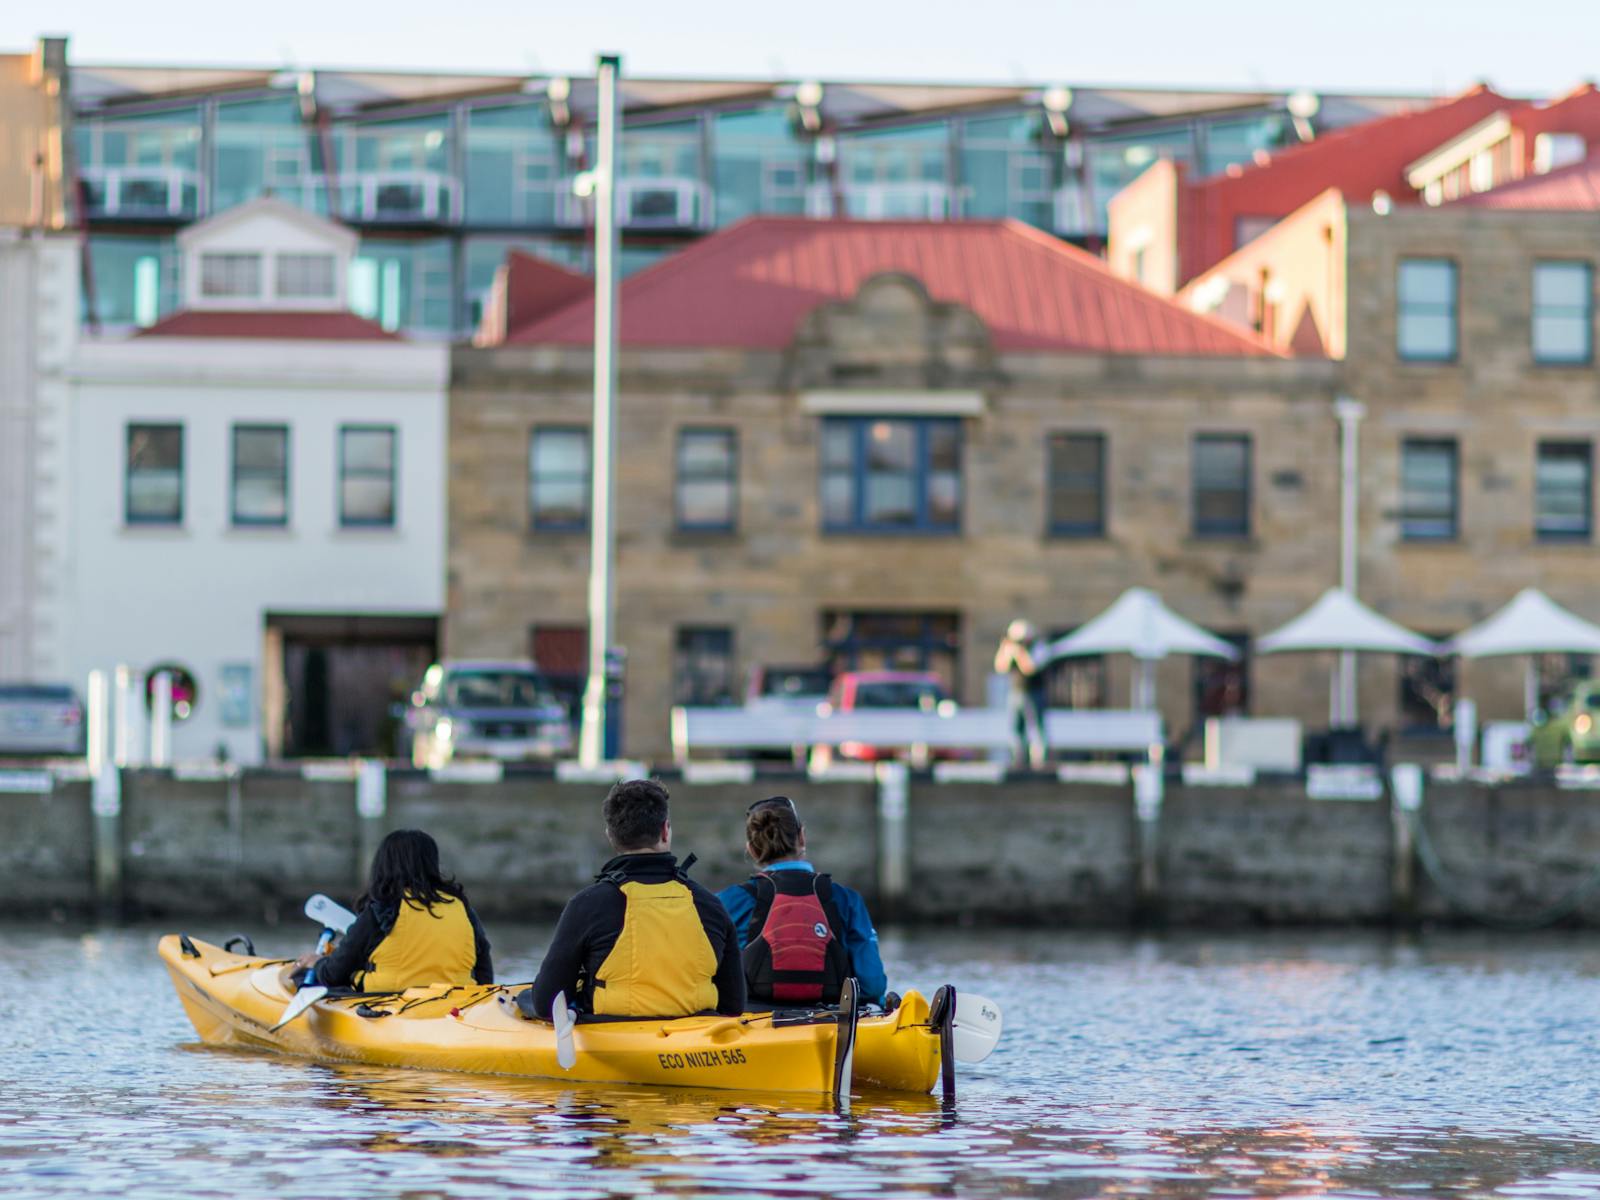 Kayakers relaxing on the water enjoying the view of heritage buildings on the Hobart waterfront